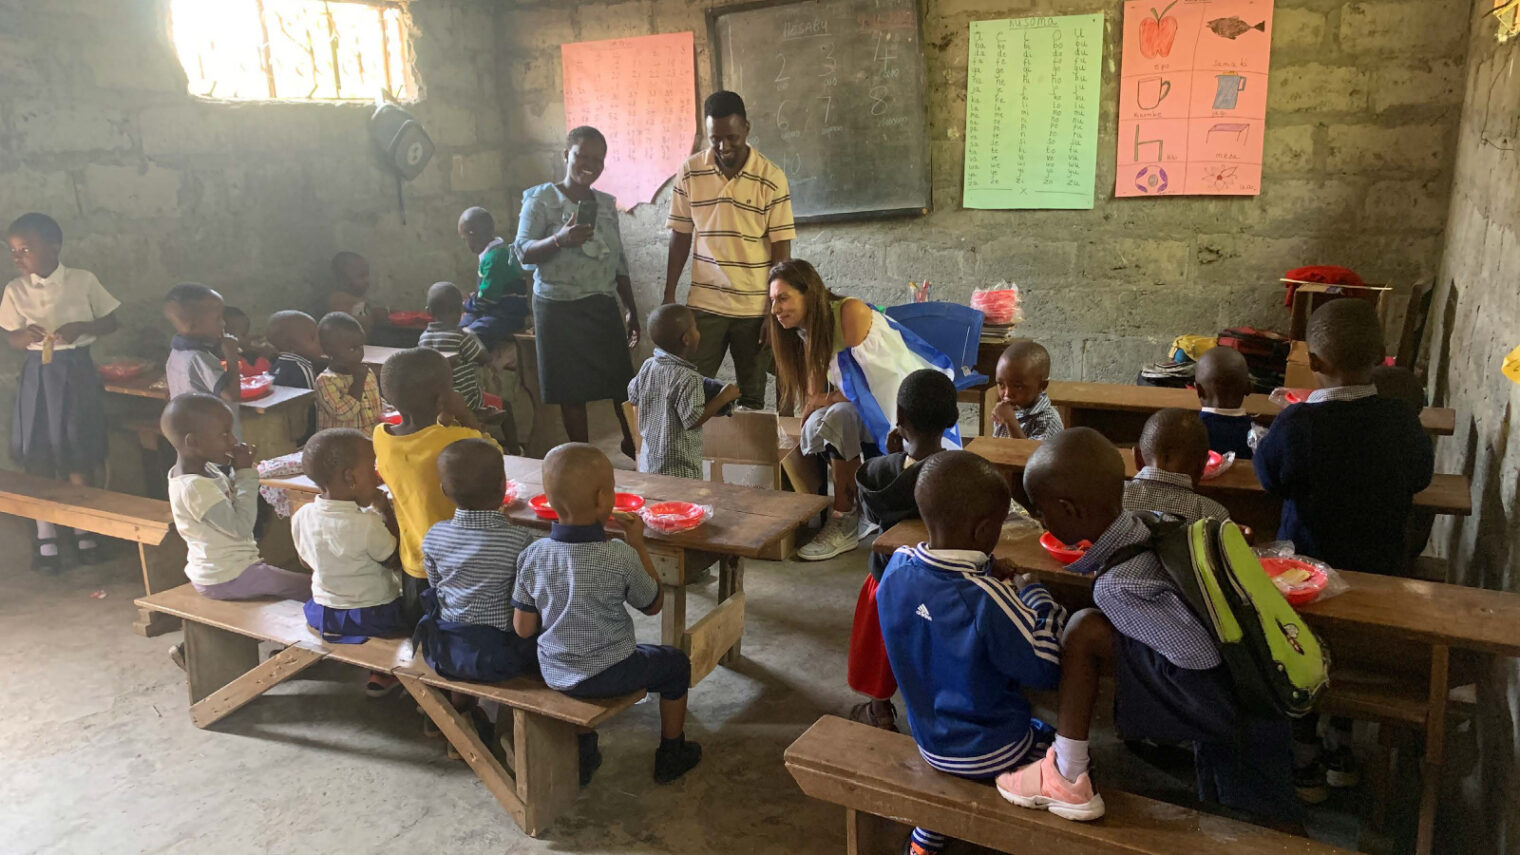 Ayelet Israeli, CEO of HalevAfrica, at a preschool for orphans and children from poor families in the village of Tsamaka in northern Tanzania. They’ve just received donated clothes and toys shipped for free by HalevAfrica partner Africa & More. Photo by Wilson/HalevAfrica